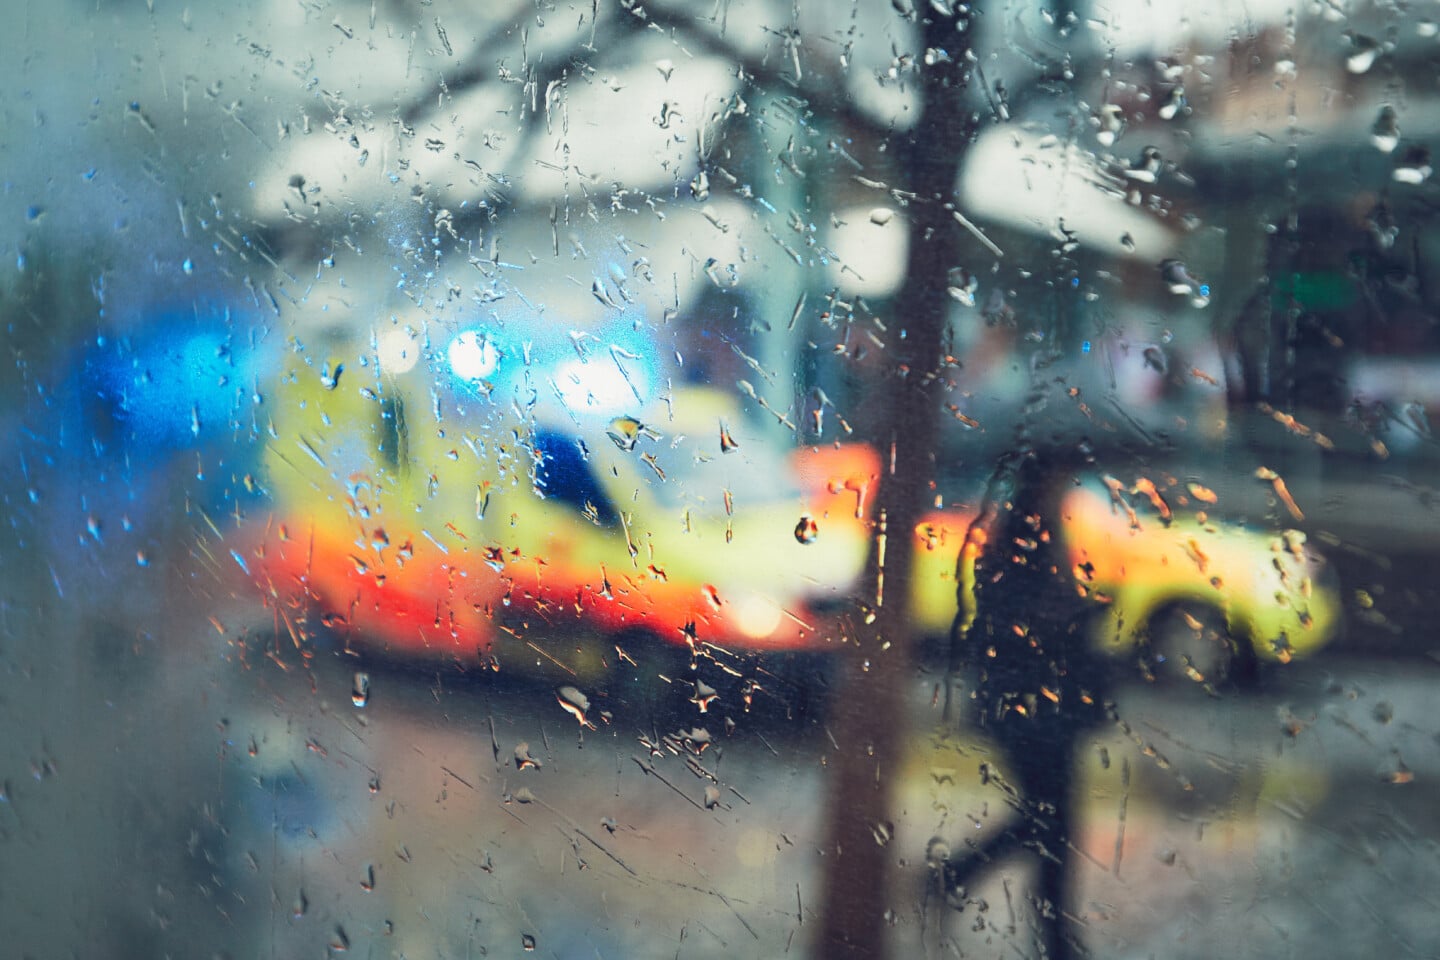 Emergency medical service response in the city. Ambulance cars on the rush street during rain. View through a car window and selective focus on the raindrop. Prague, Czech Republic.